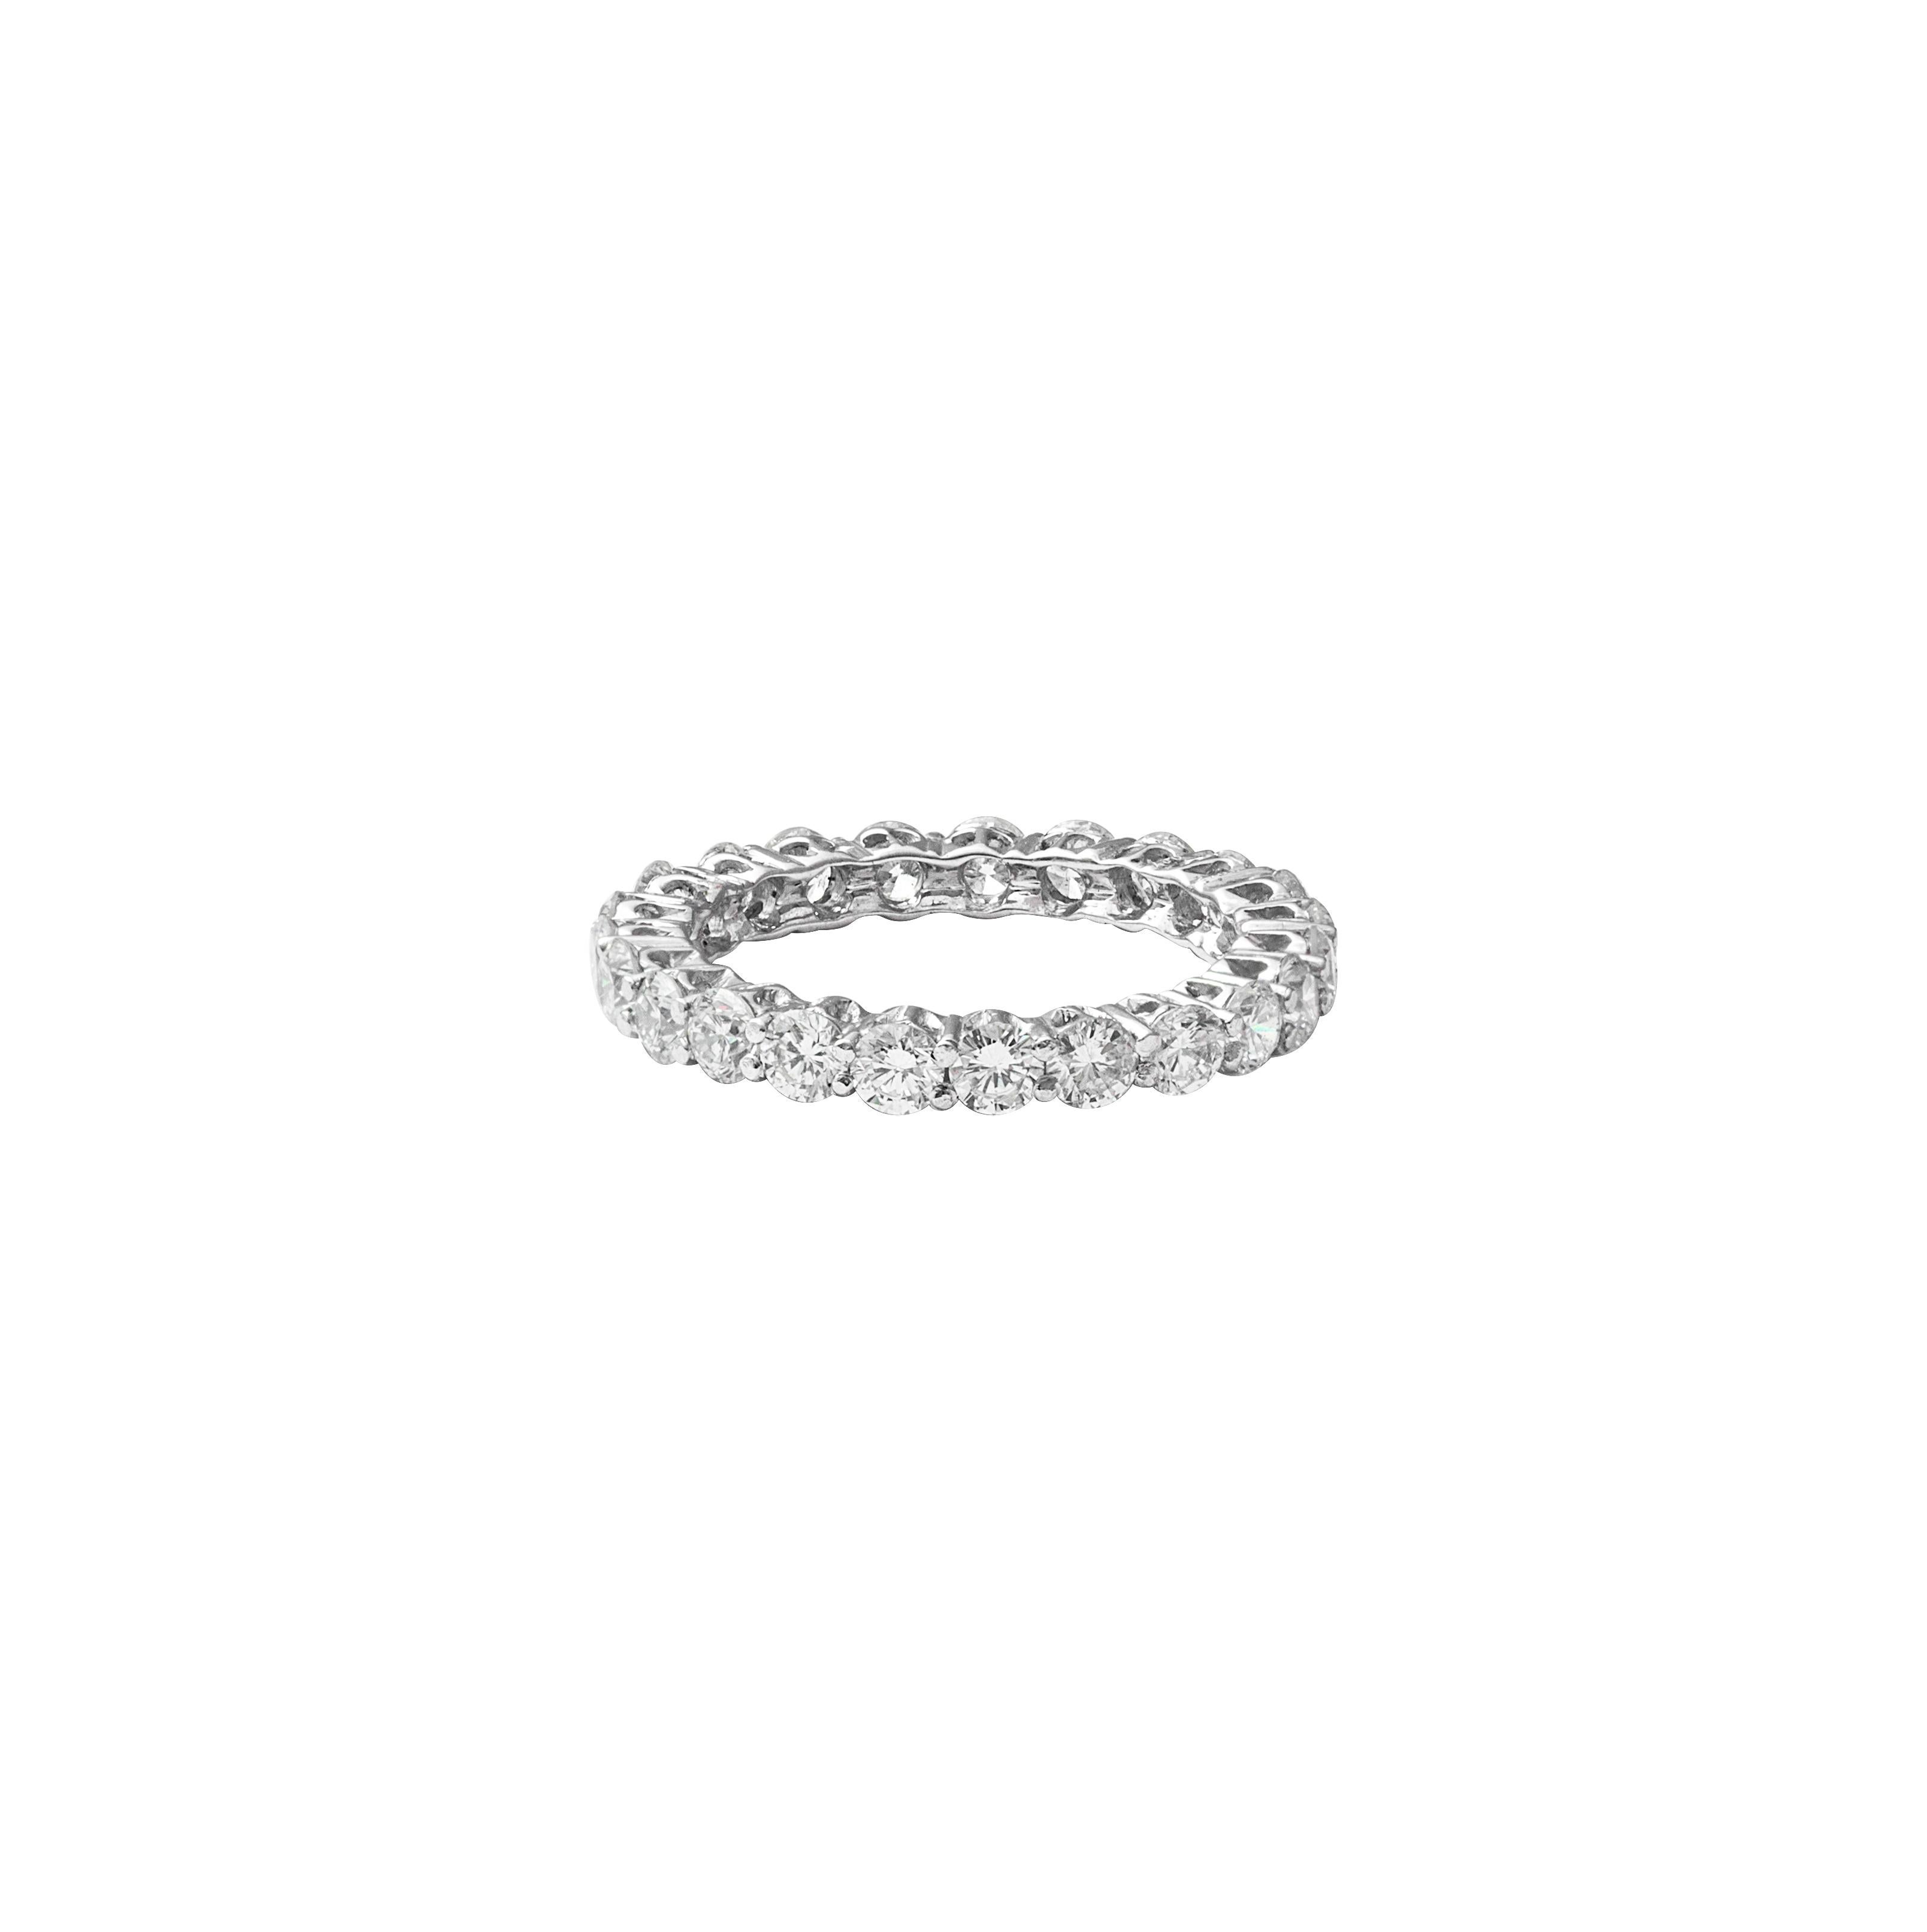 18 Karat White Gold Diamond Infinity Band

Beautiful diamond band set in 18 Karat white gold studded with 2.30cts of stunning white diamonds is the perfect accessory for evening ensemble. 

Diamonds - 2.30cts
18 karat gold - 2.840gms
Size - US 7

